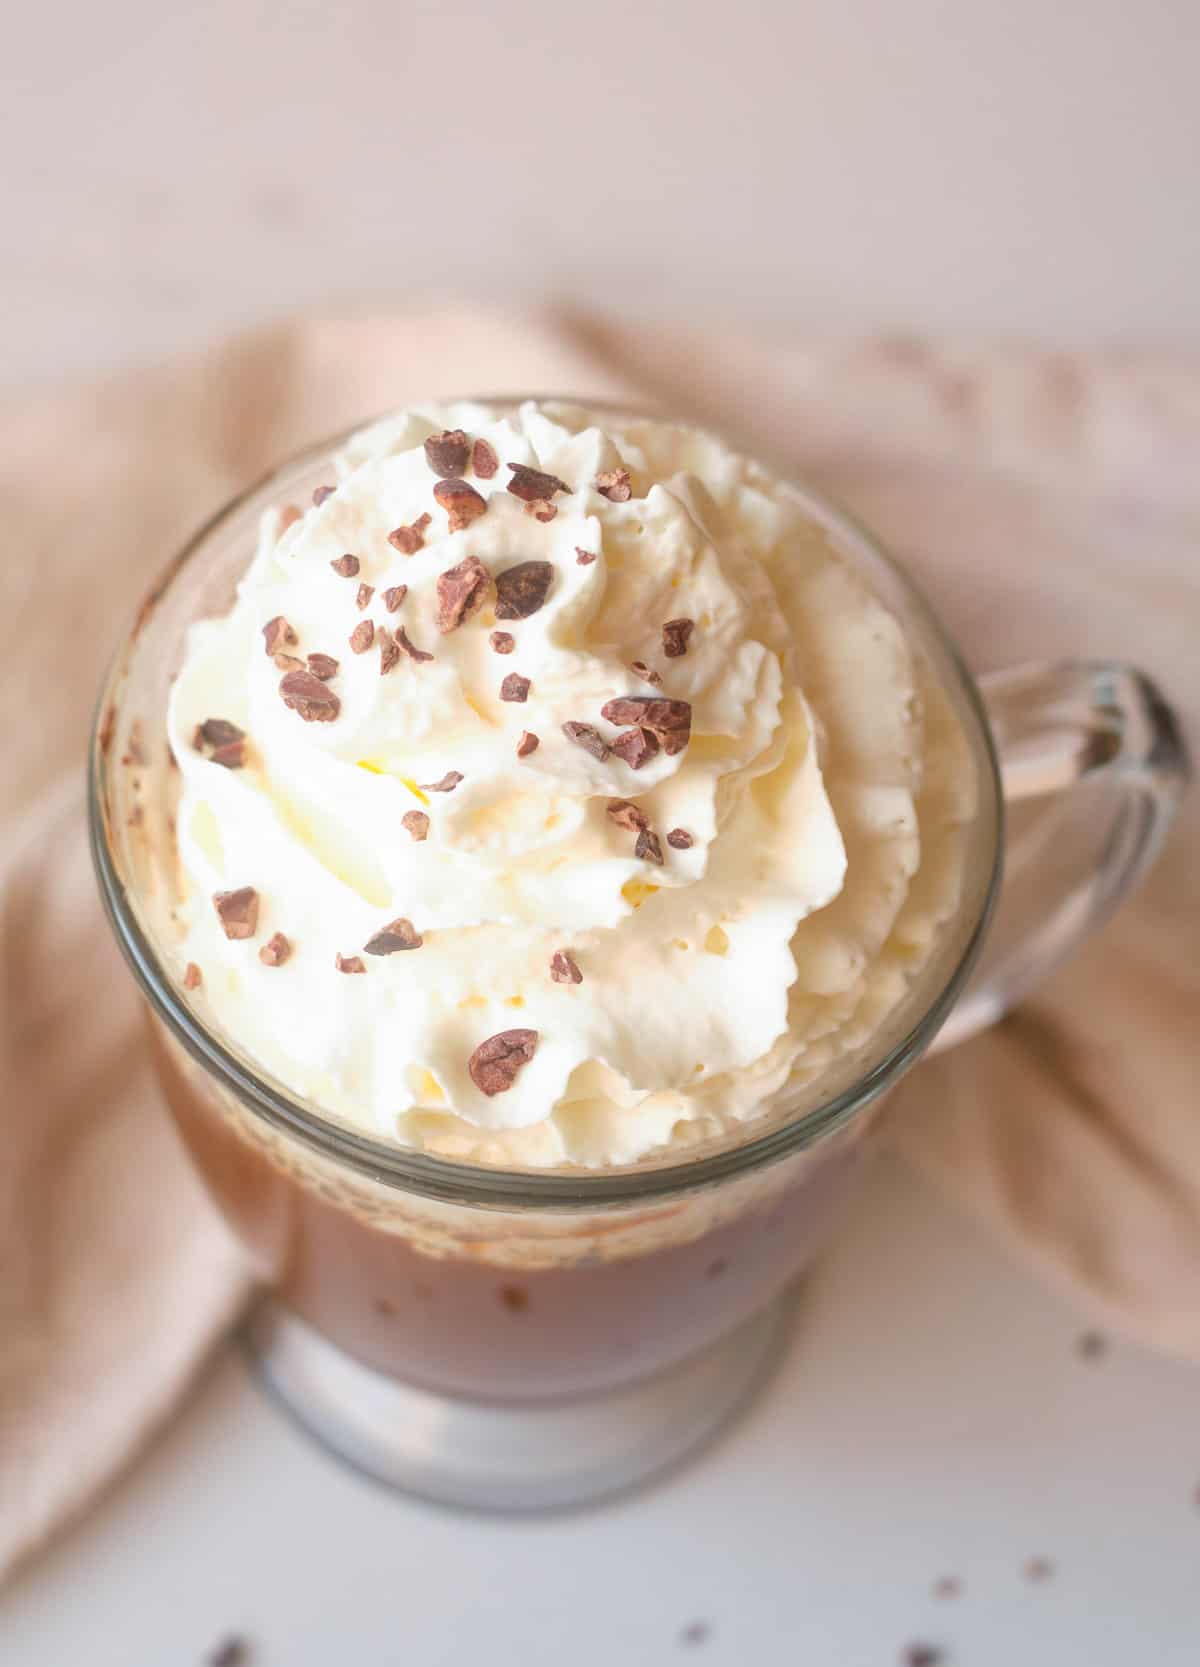 Mocha latte topped with whipped cream.